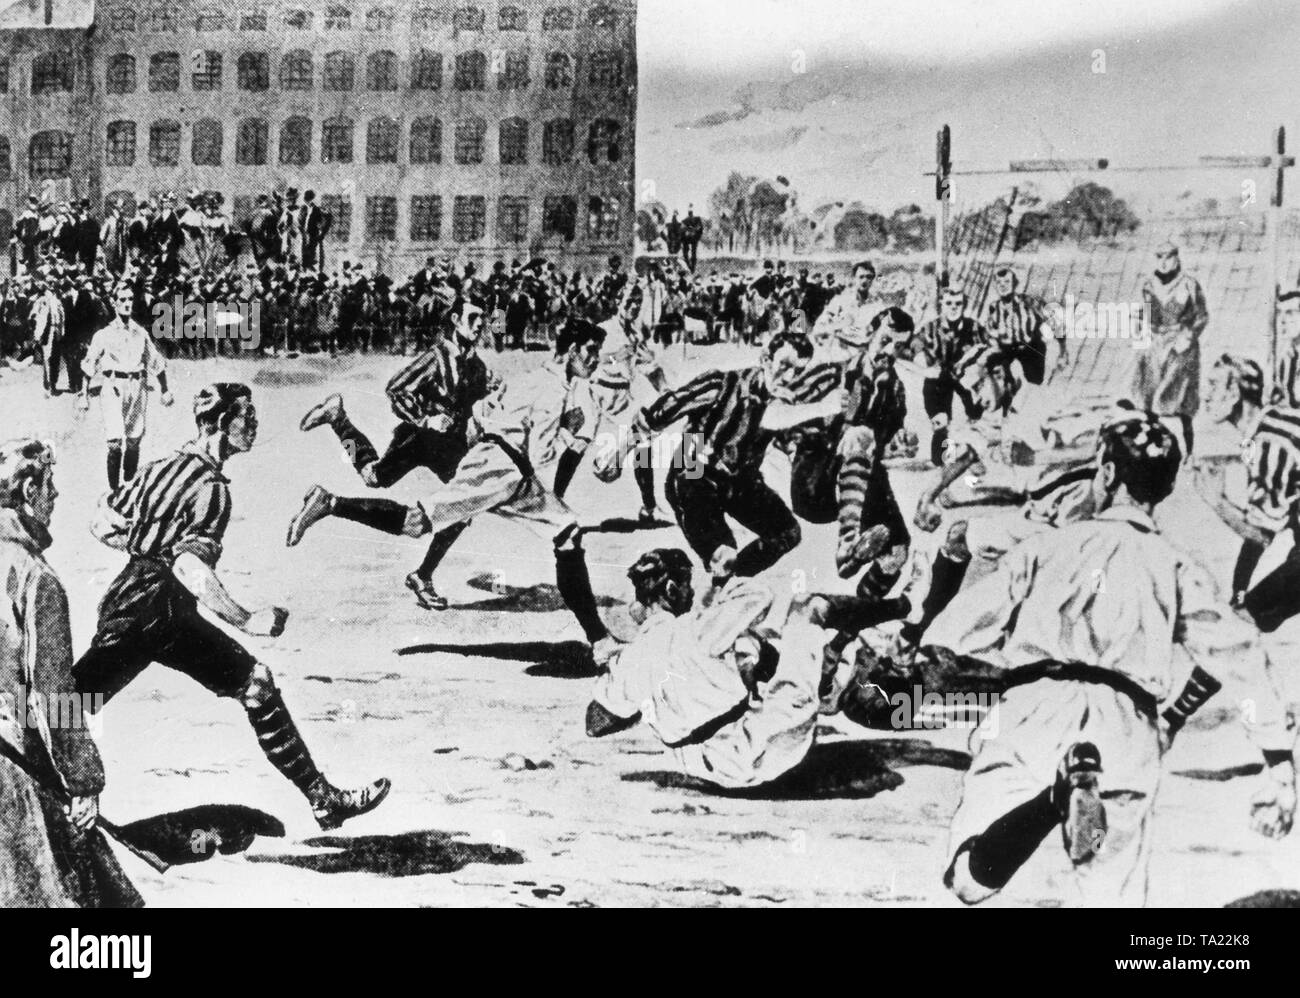 One of the first international football matches, England against Germany in 1902, which ended 2:2 Stock Photo